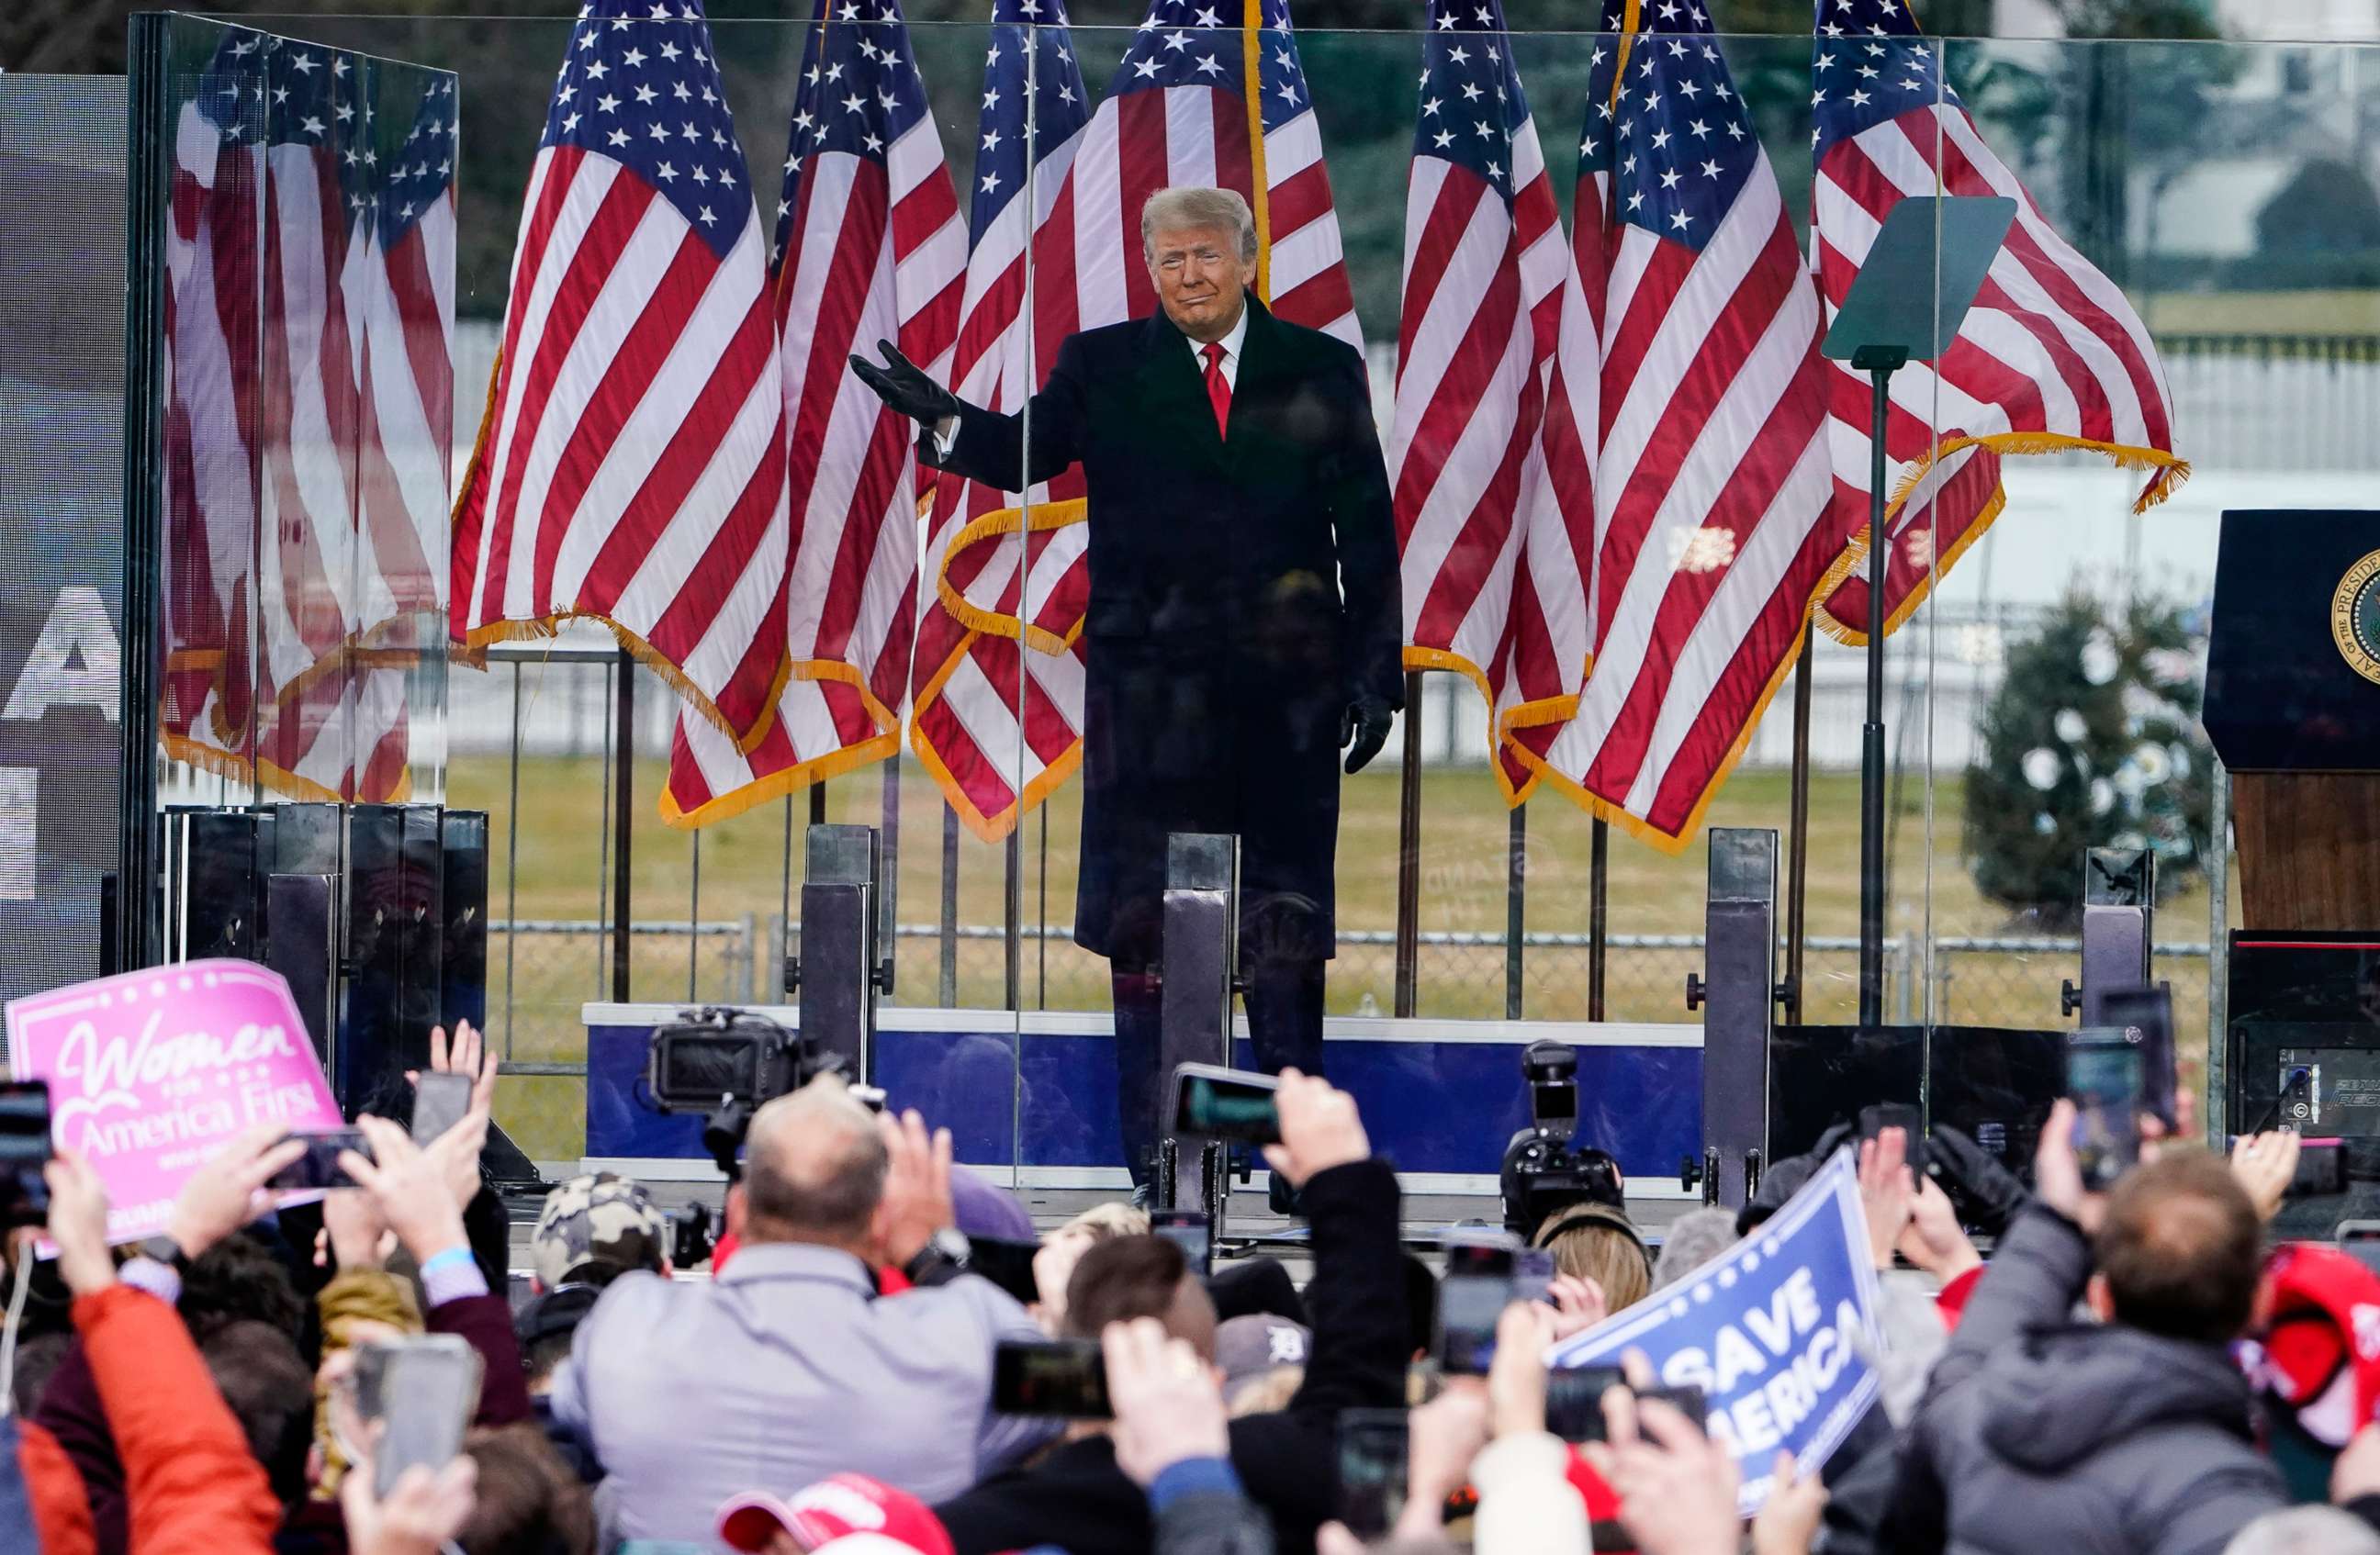 PHOTO: President Donald Trump arrives to speak at a rally Wednesday, Jan. 6, 2021, in Washington D.C.